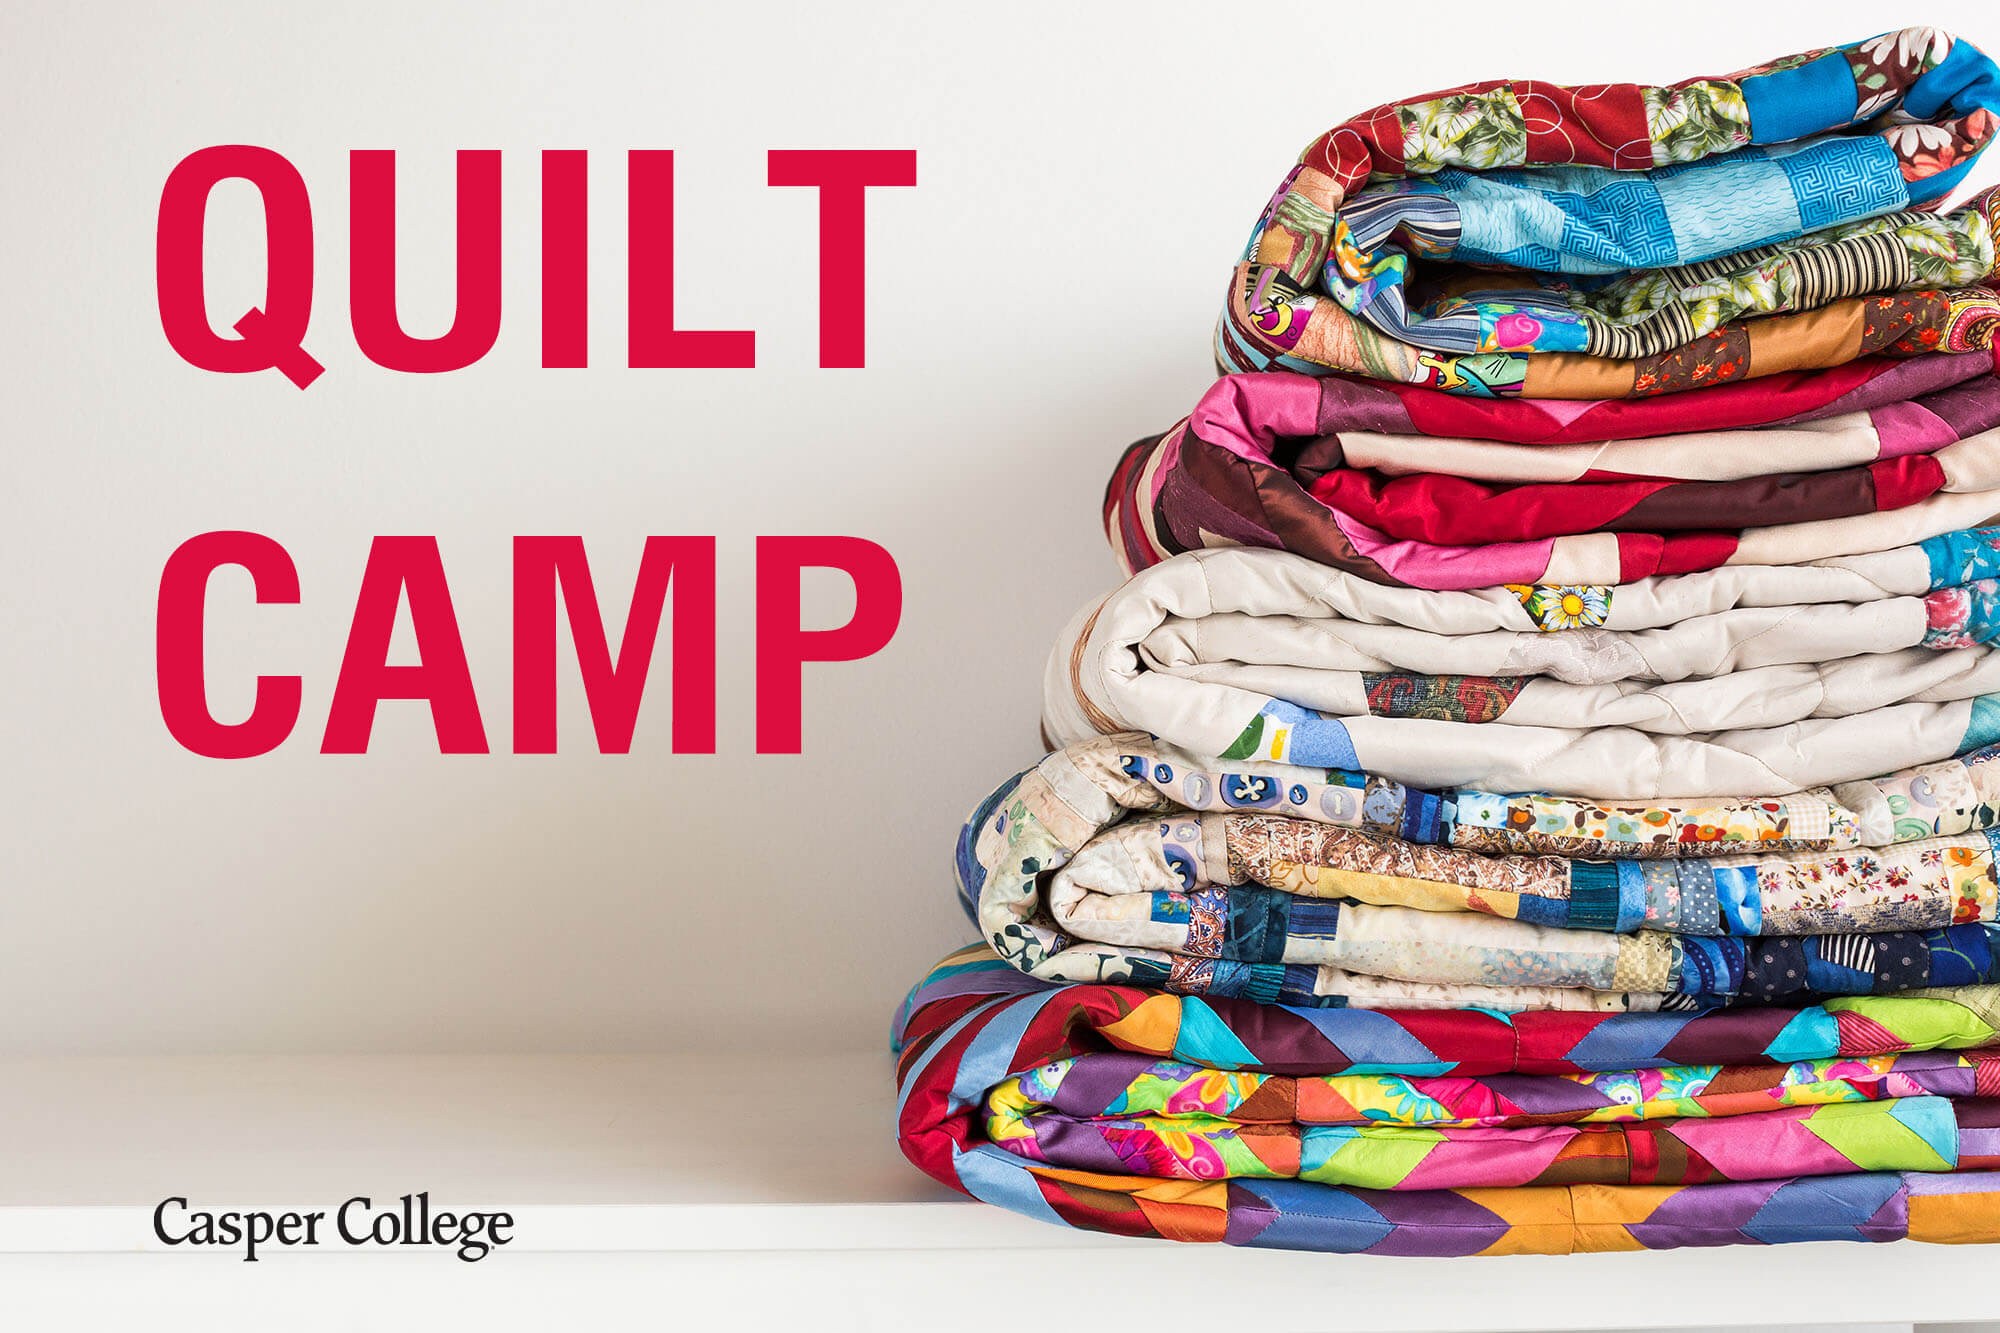 Image for quilt camp press release.